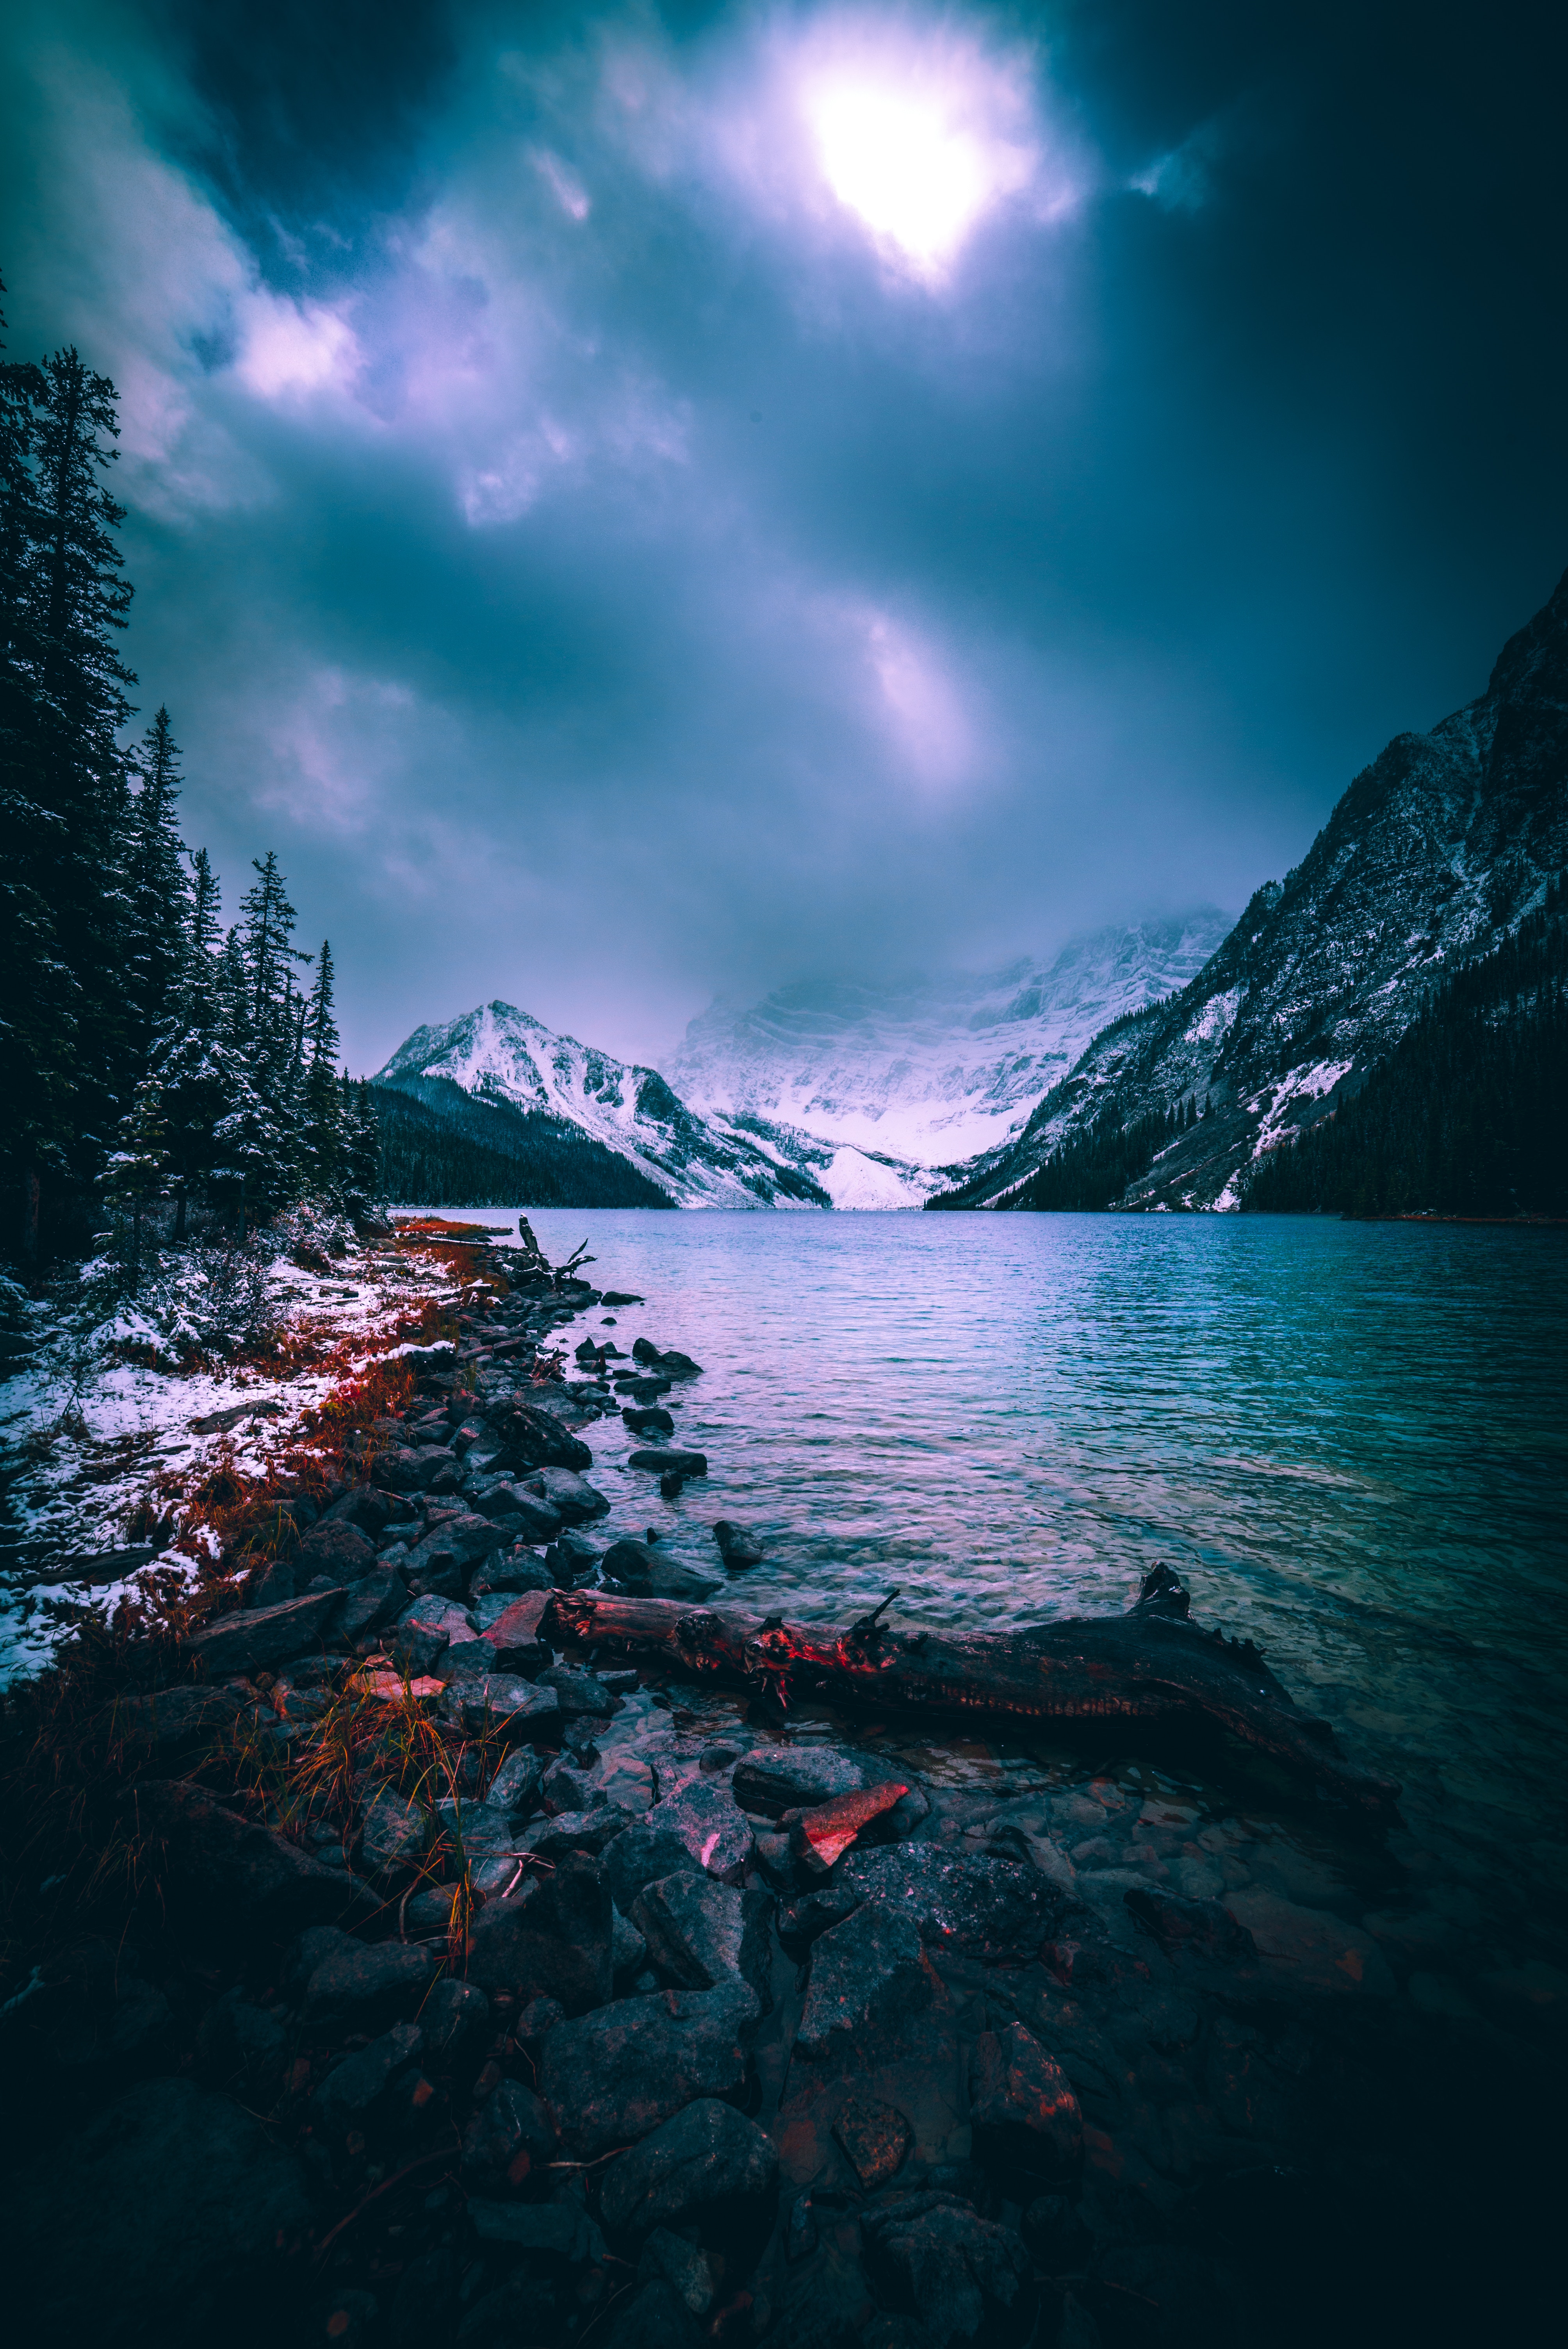 117130 download wallpaper mountains, nature, stones, snow, lake, canada, fog, chefren, cefren screensavers and pictures for free